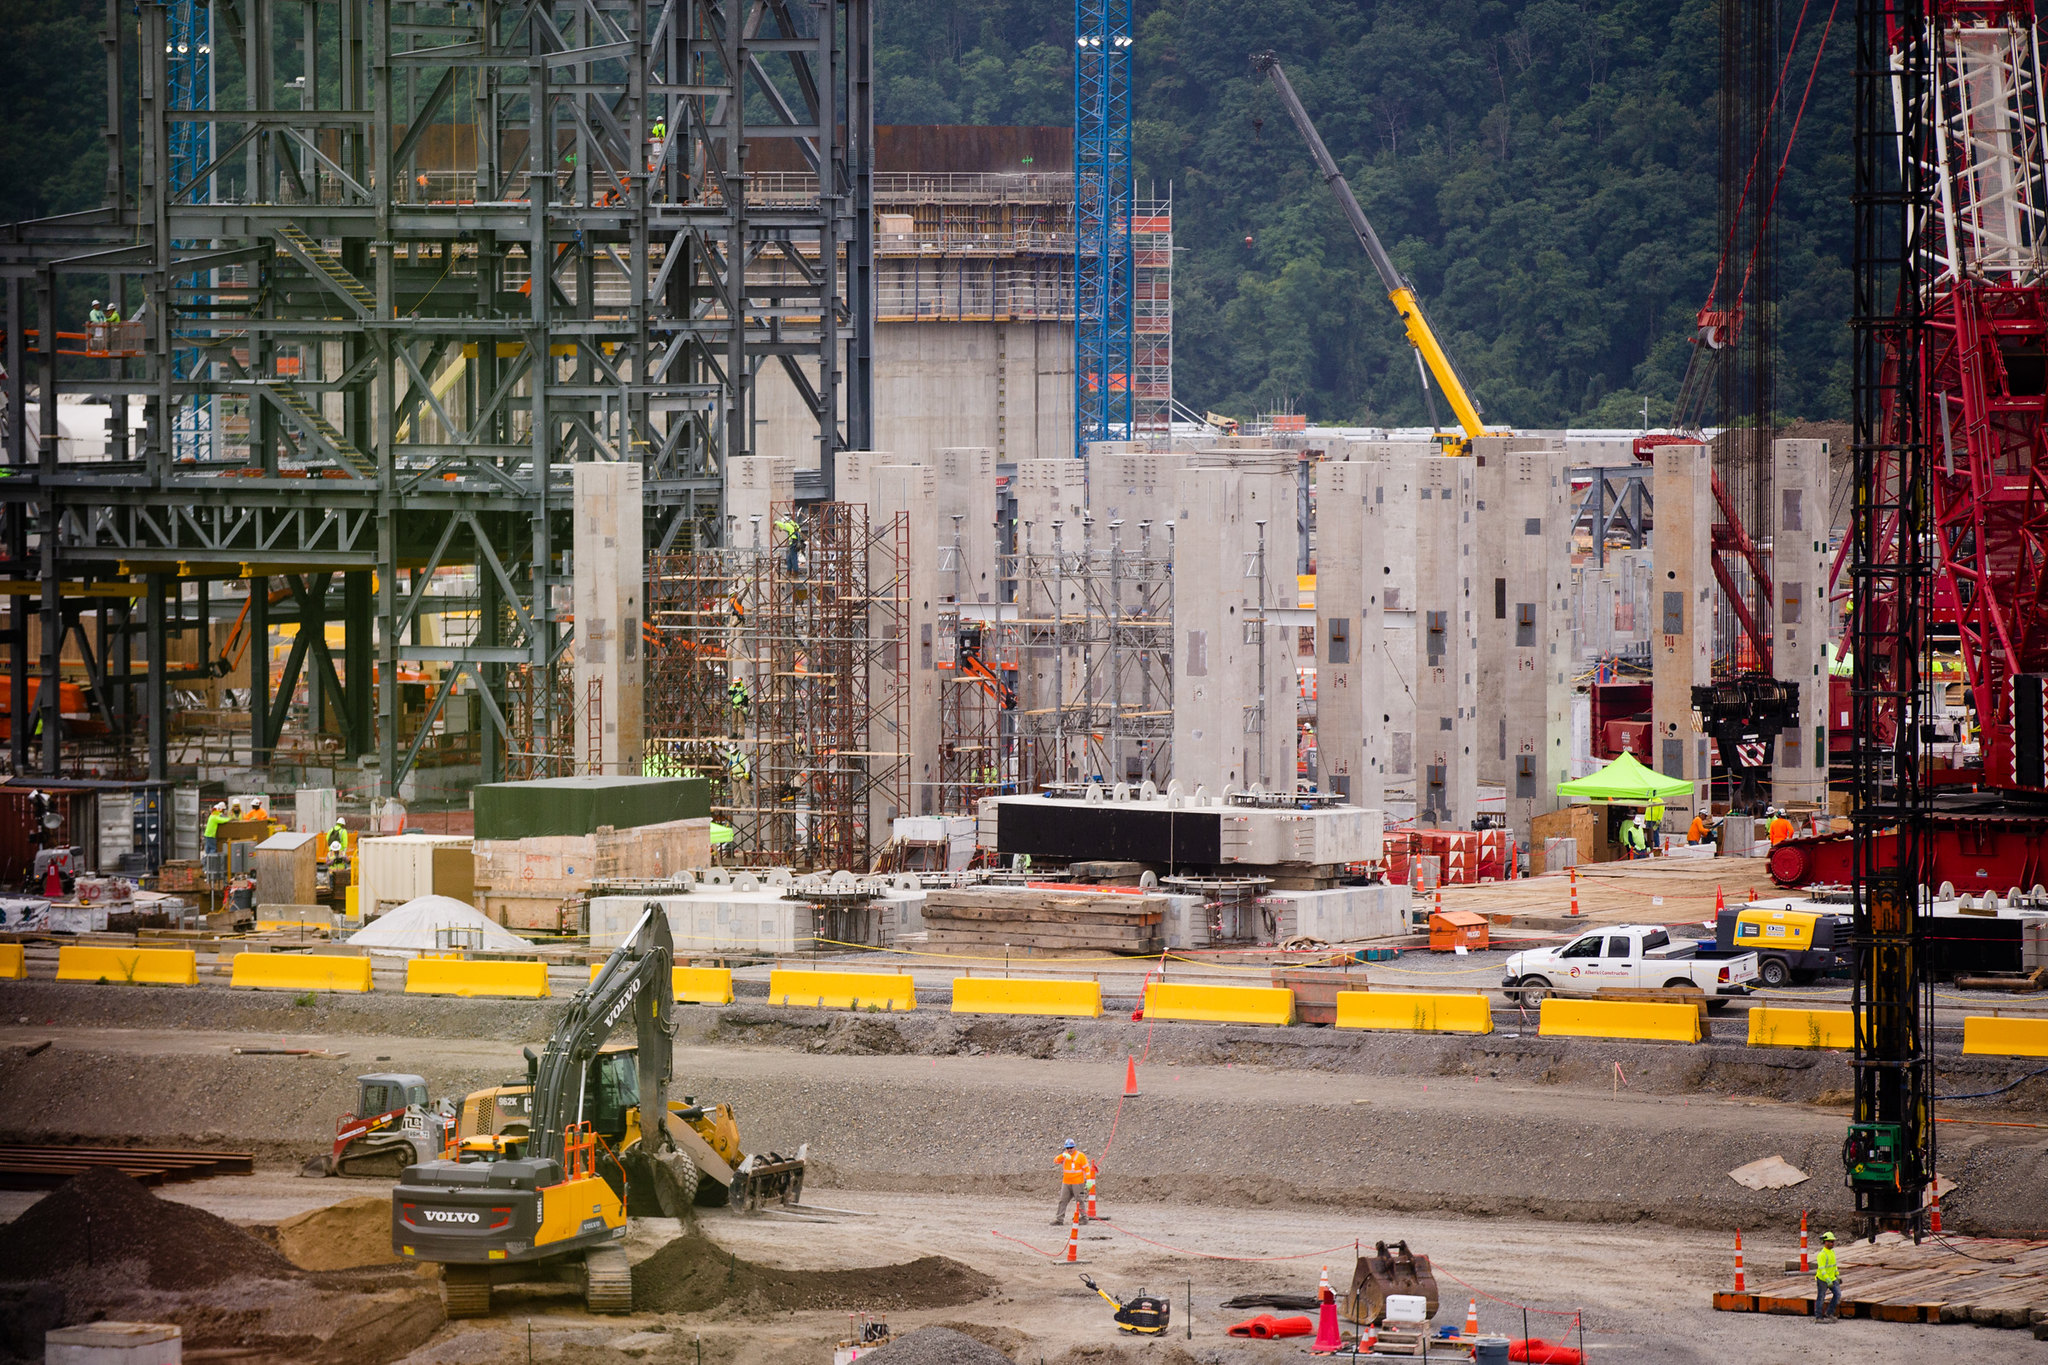 Construction at the Shell plastics plant in Beaver County in 2018